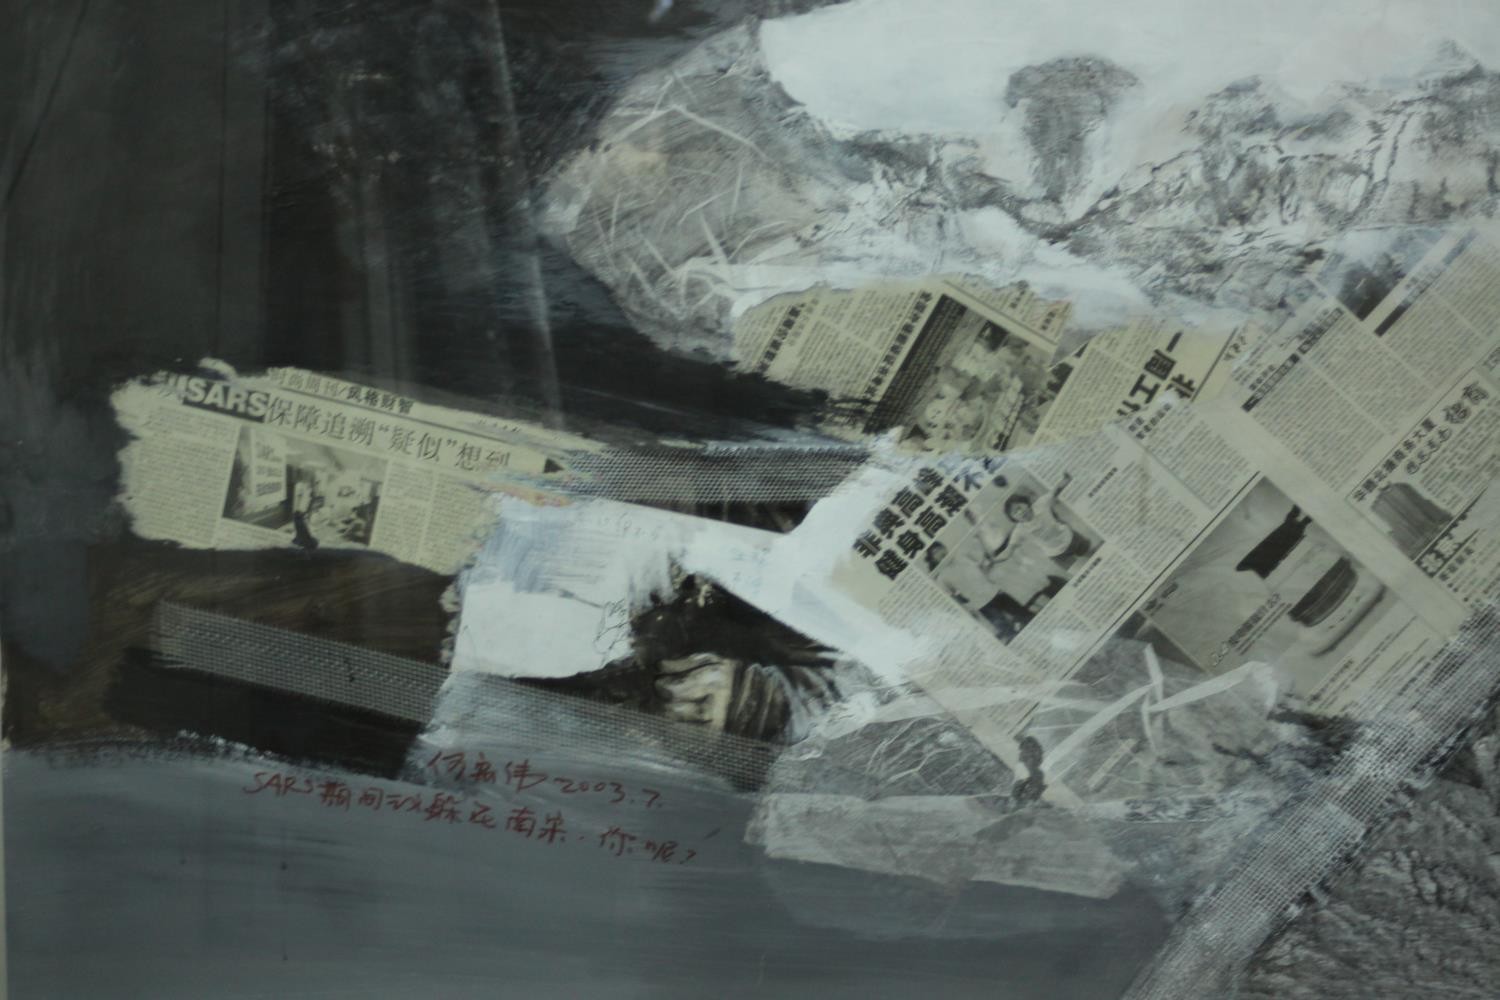 He Hong Wei, 1971, "Untitled" Mixed media on paper, label verso. H.92 W.120cm. - Image 4 of 10